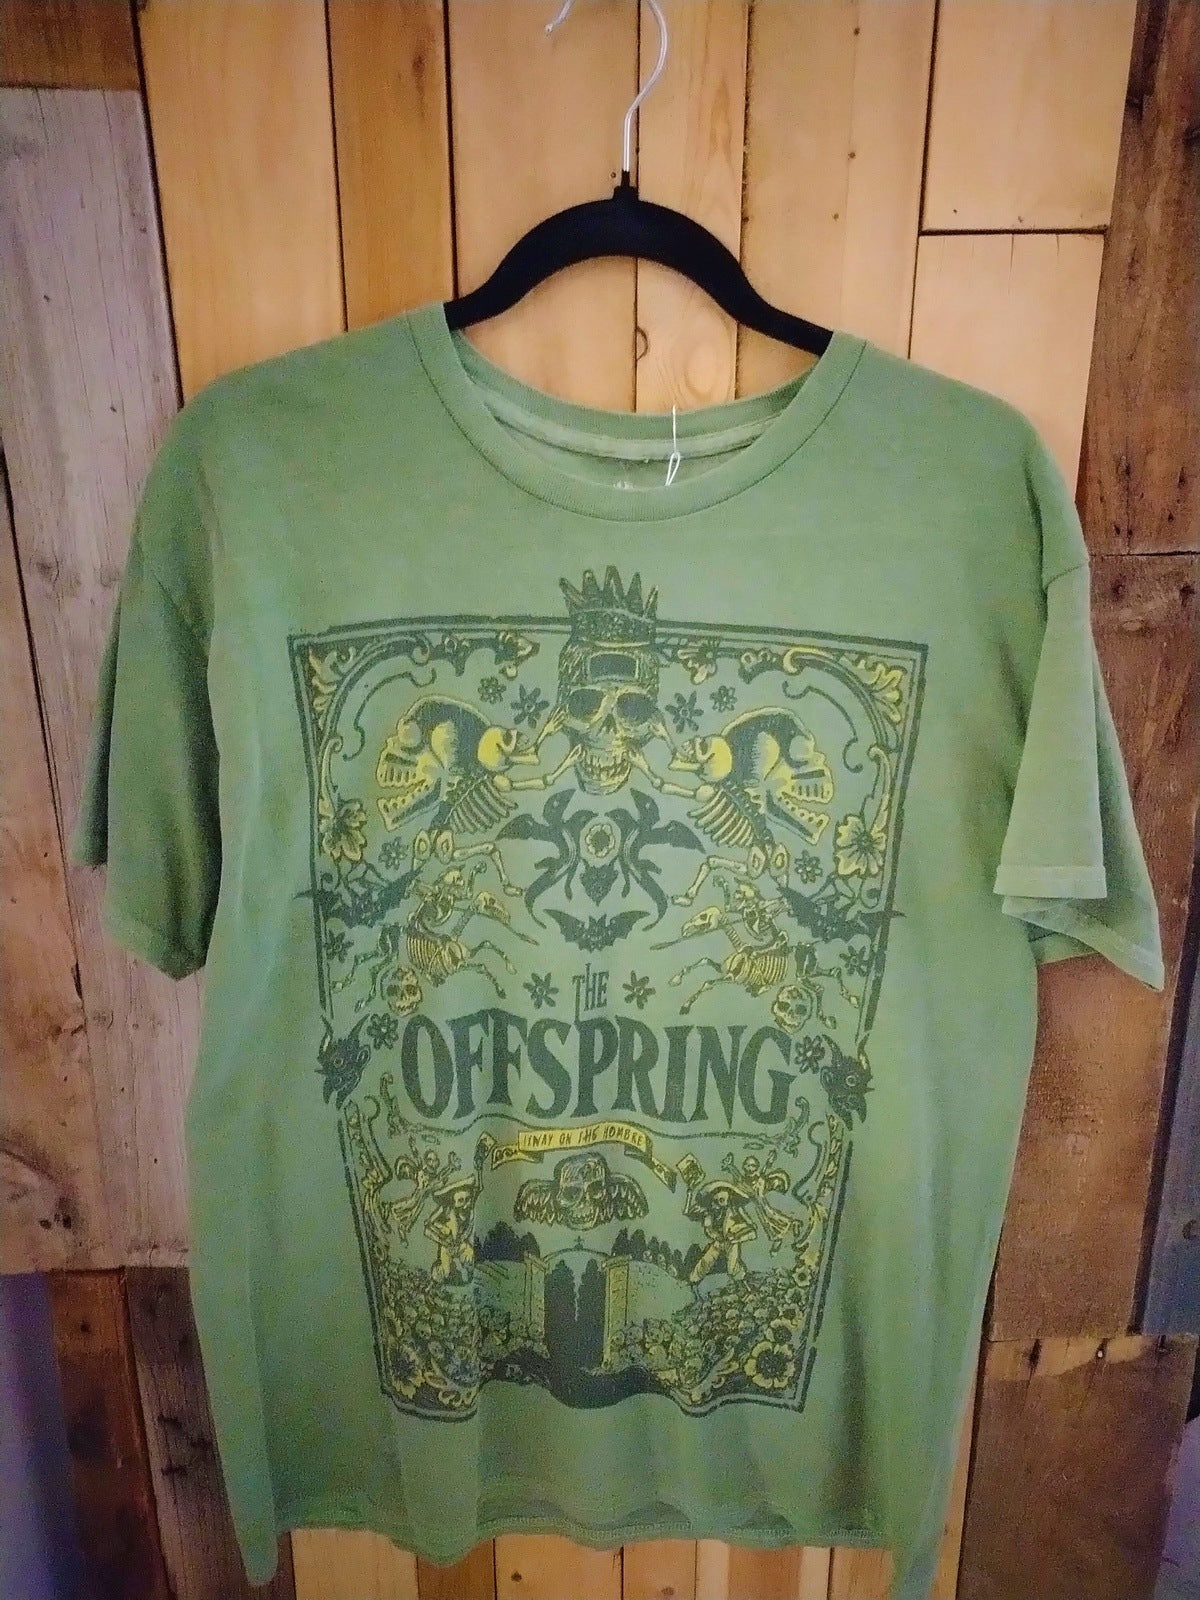 The Offspring Official Merchandise by Goodie Two Sleeves T Shirt Size Large New with Tags